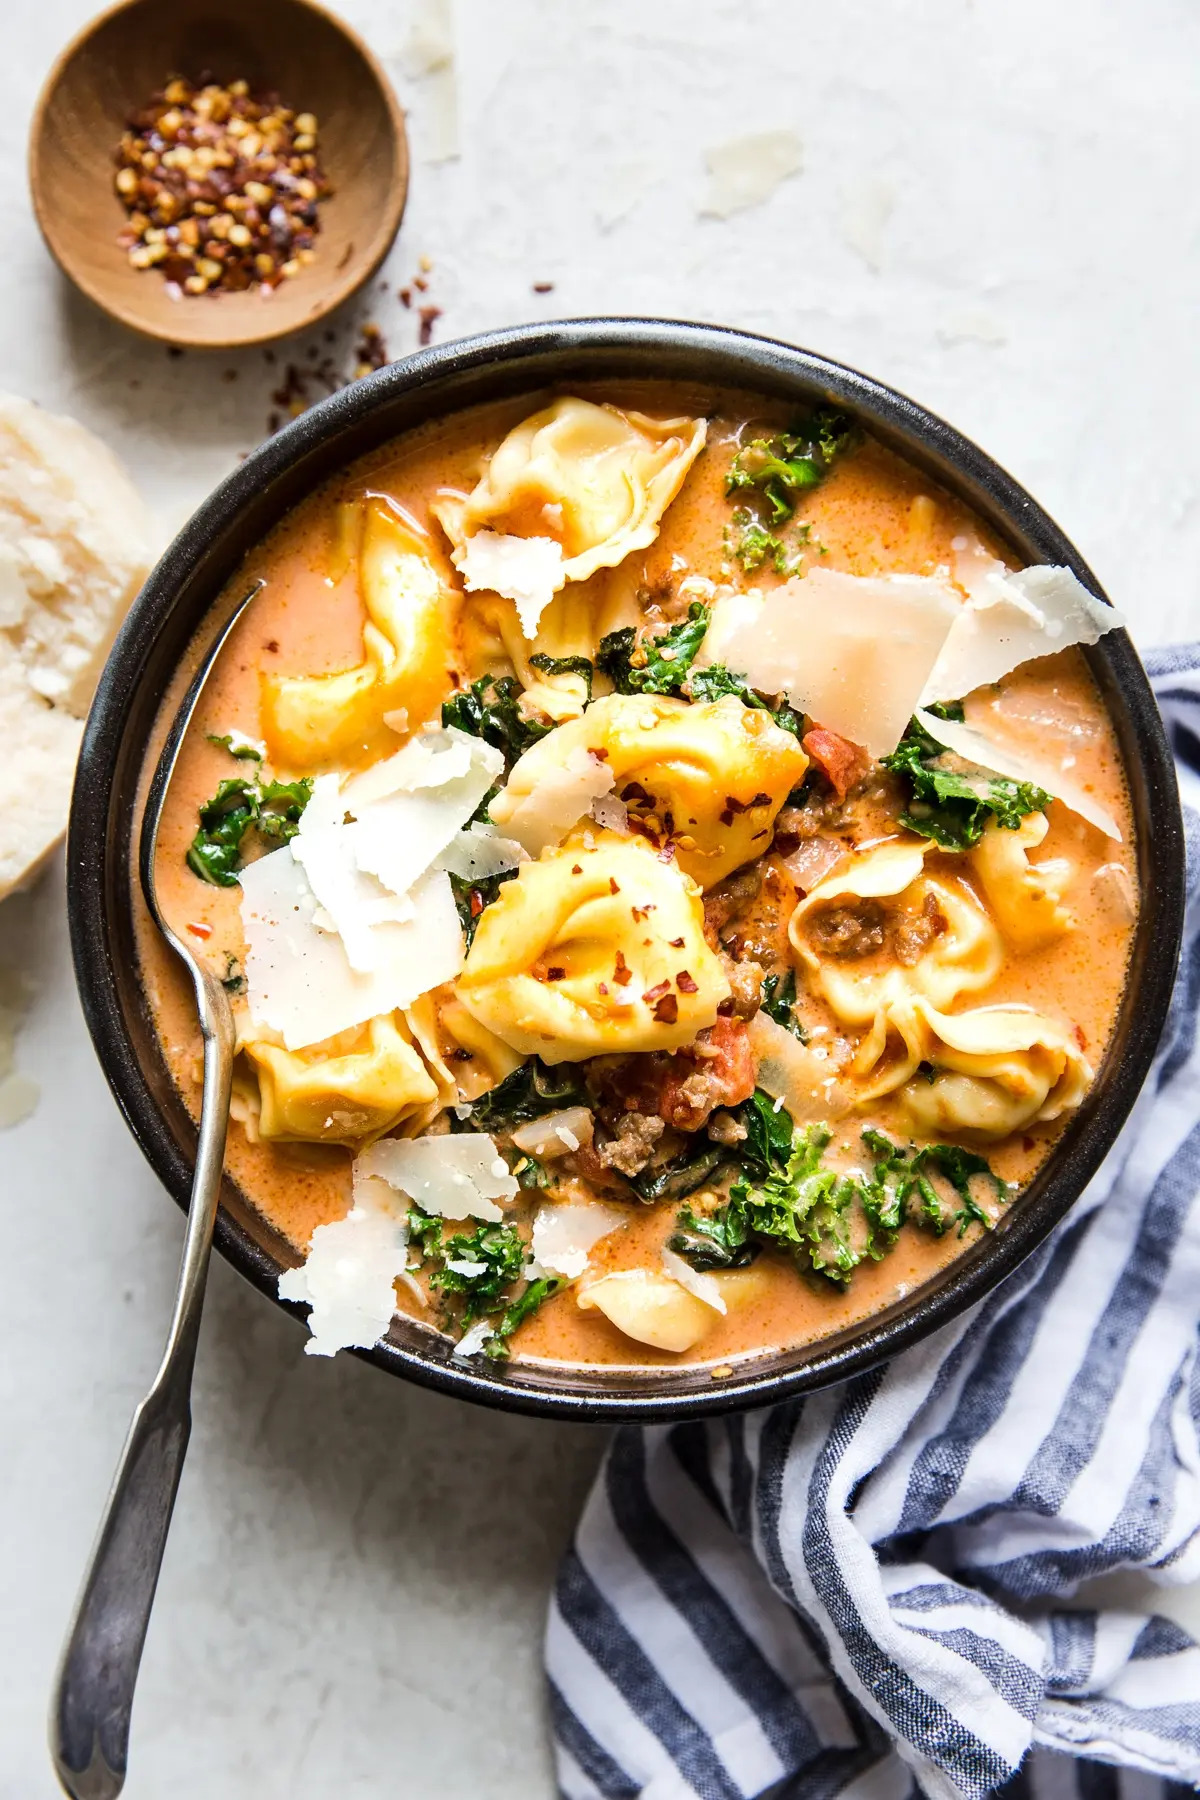 Creamy Tomato Tortellini Soup with Sausage and Kale by The Modern Proper